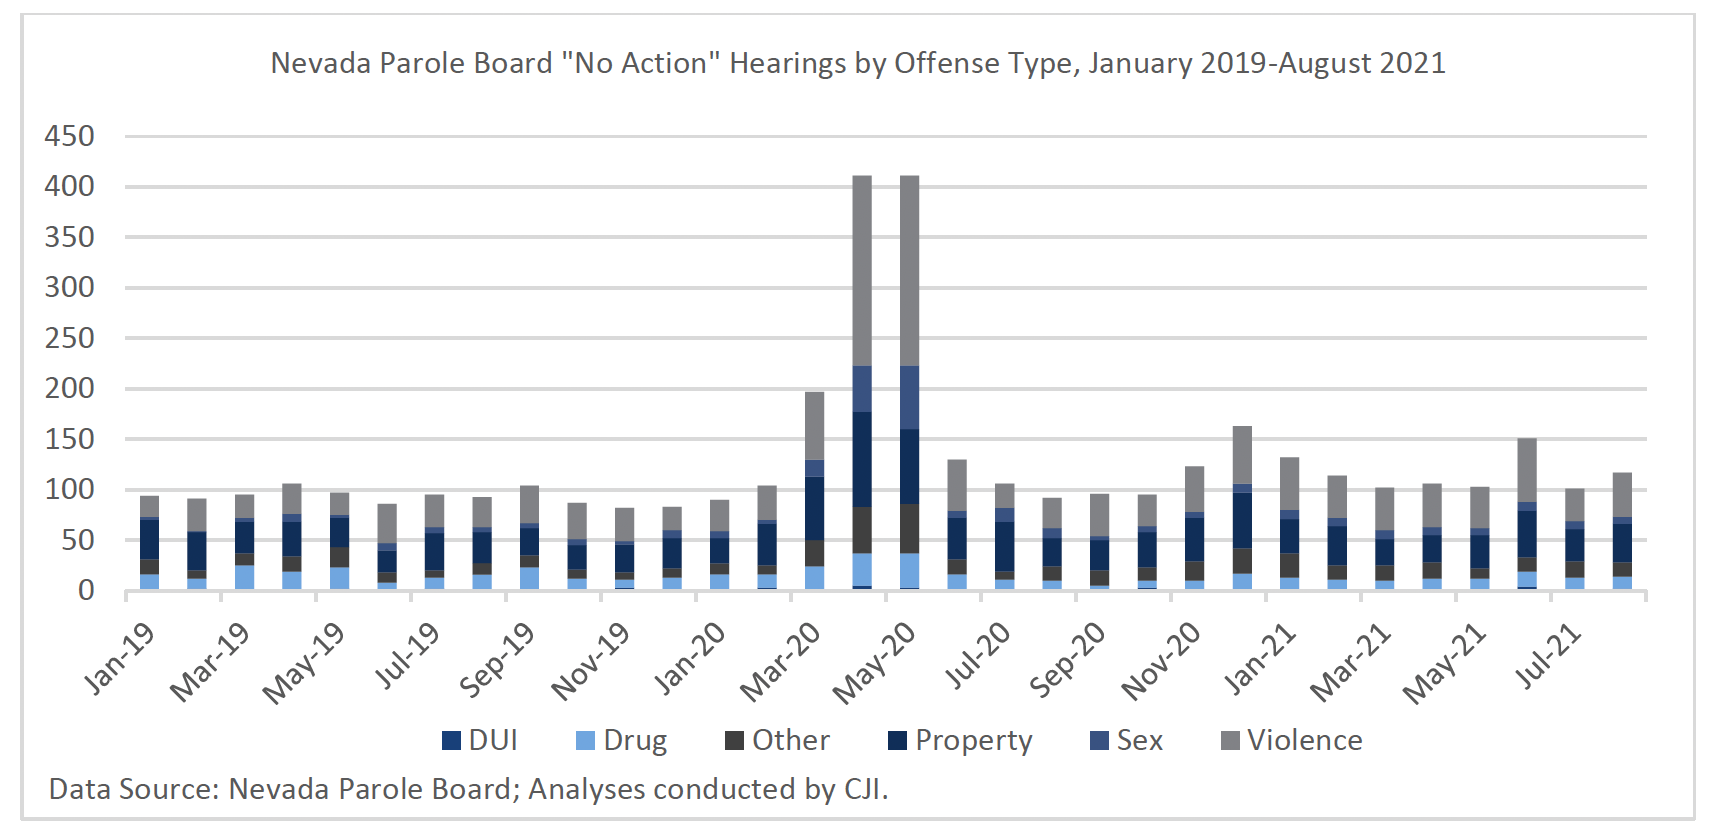 A view of “No action” hearings by offense type from January to August 2021 